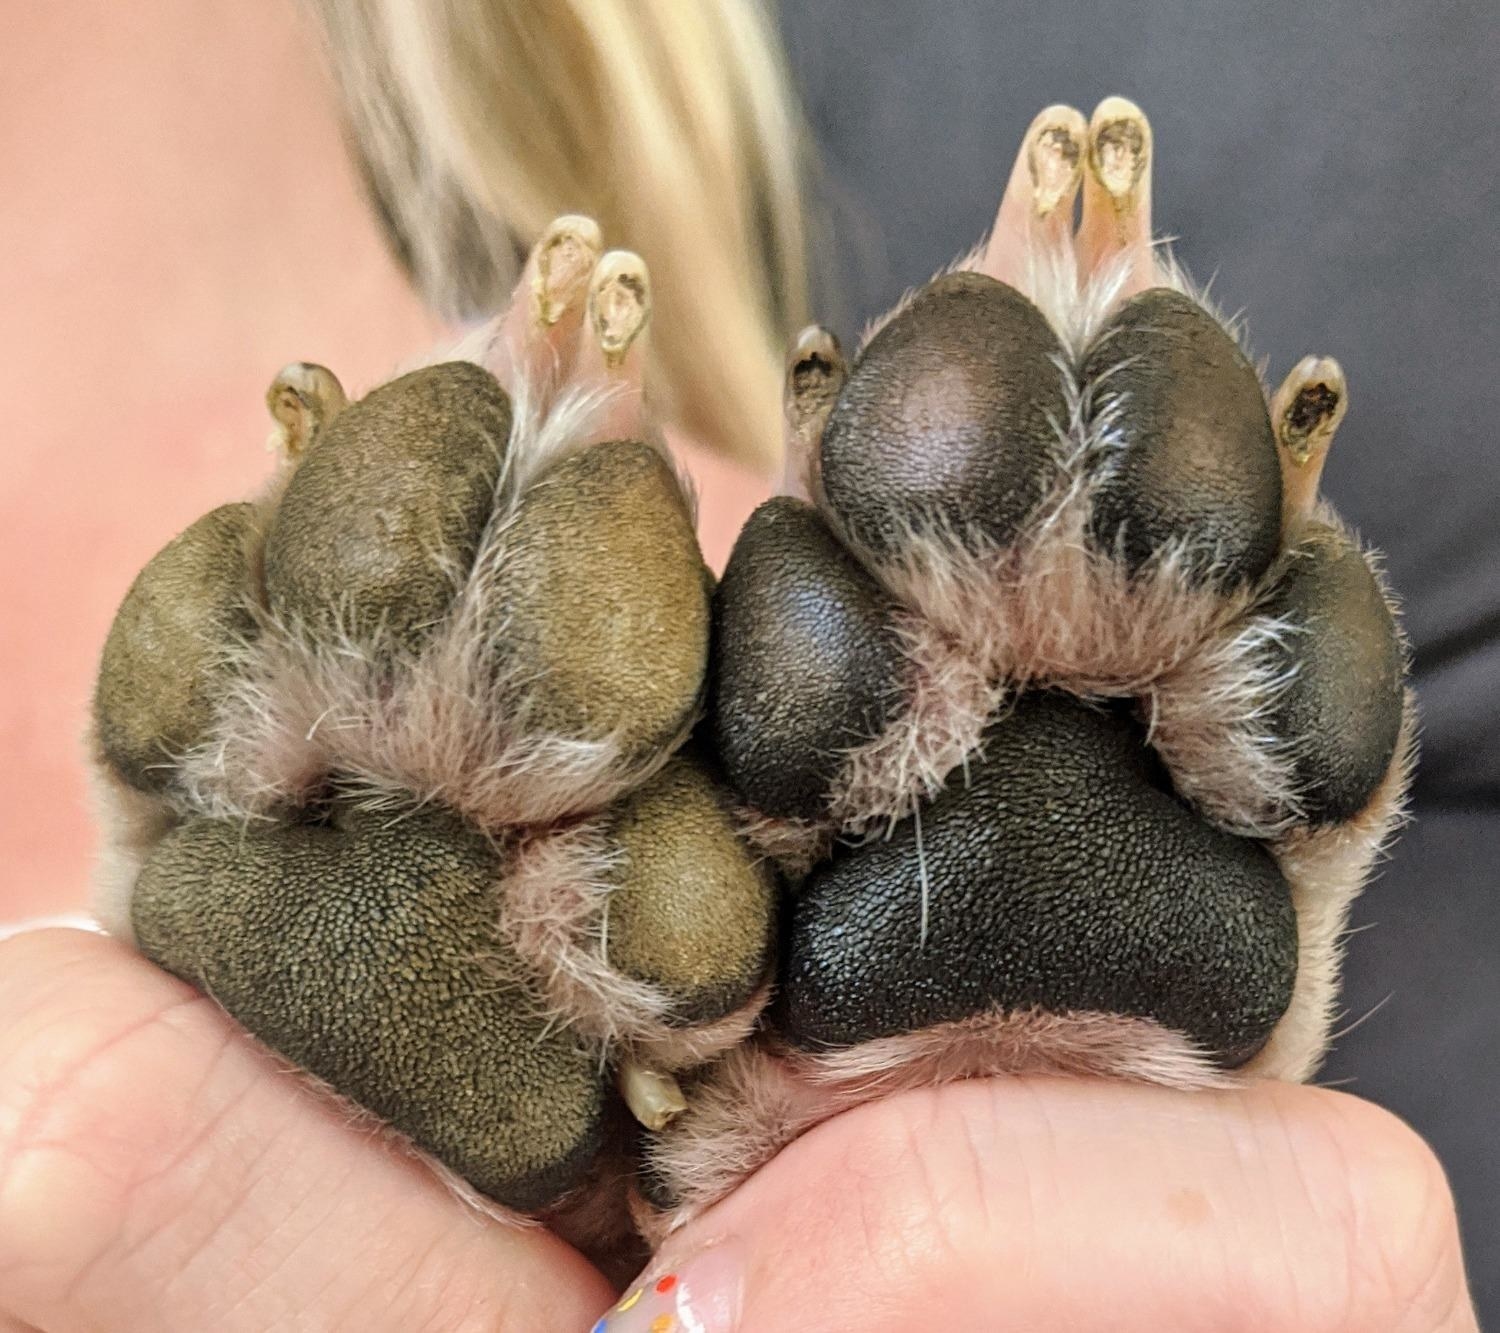 Reviewer photo of their dog's paw pads, one with the butter and one without